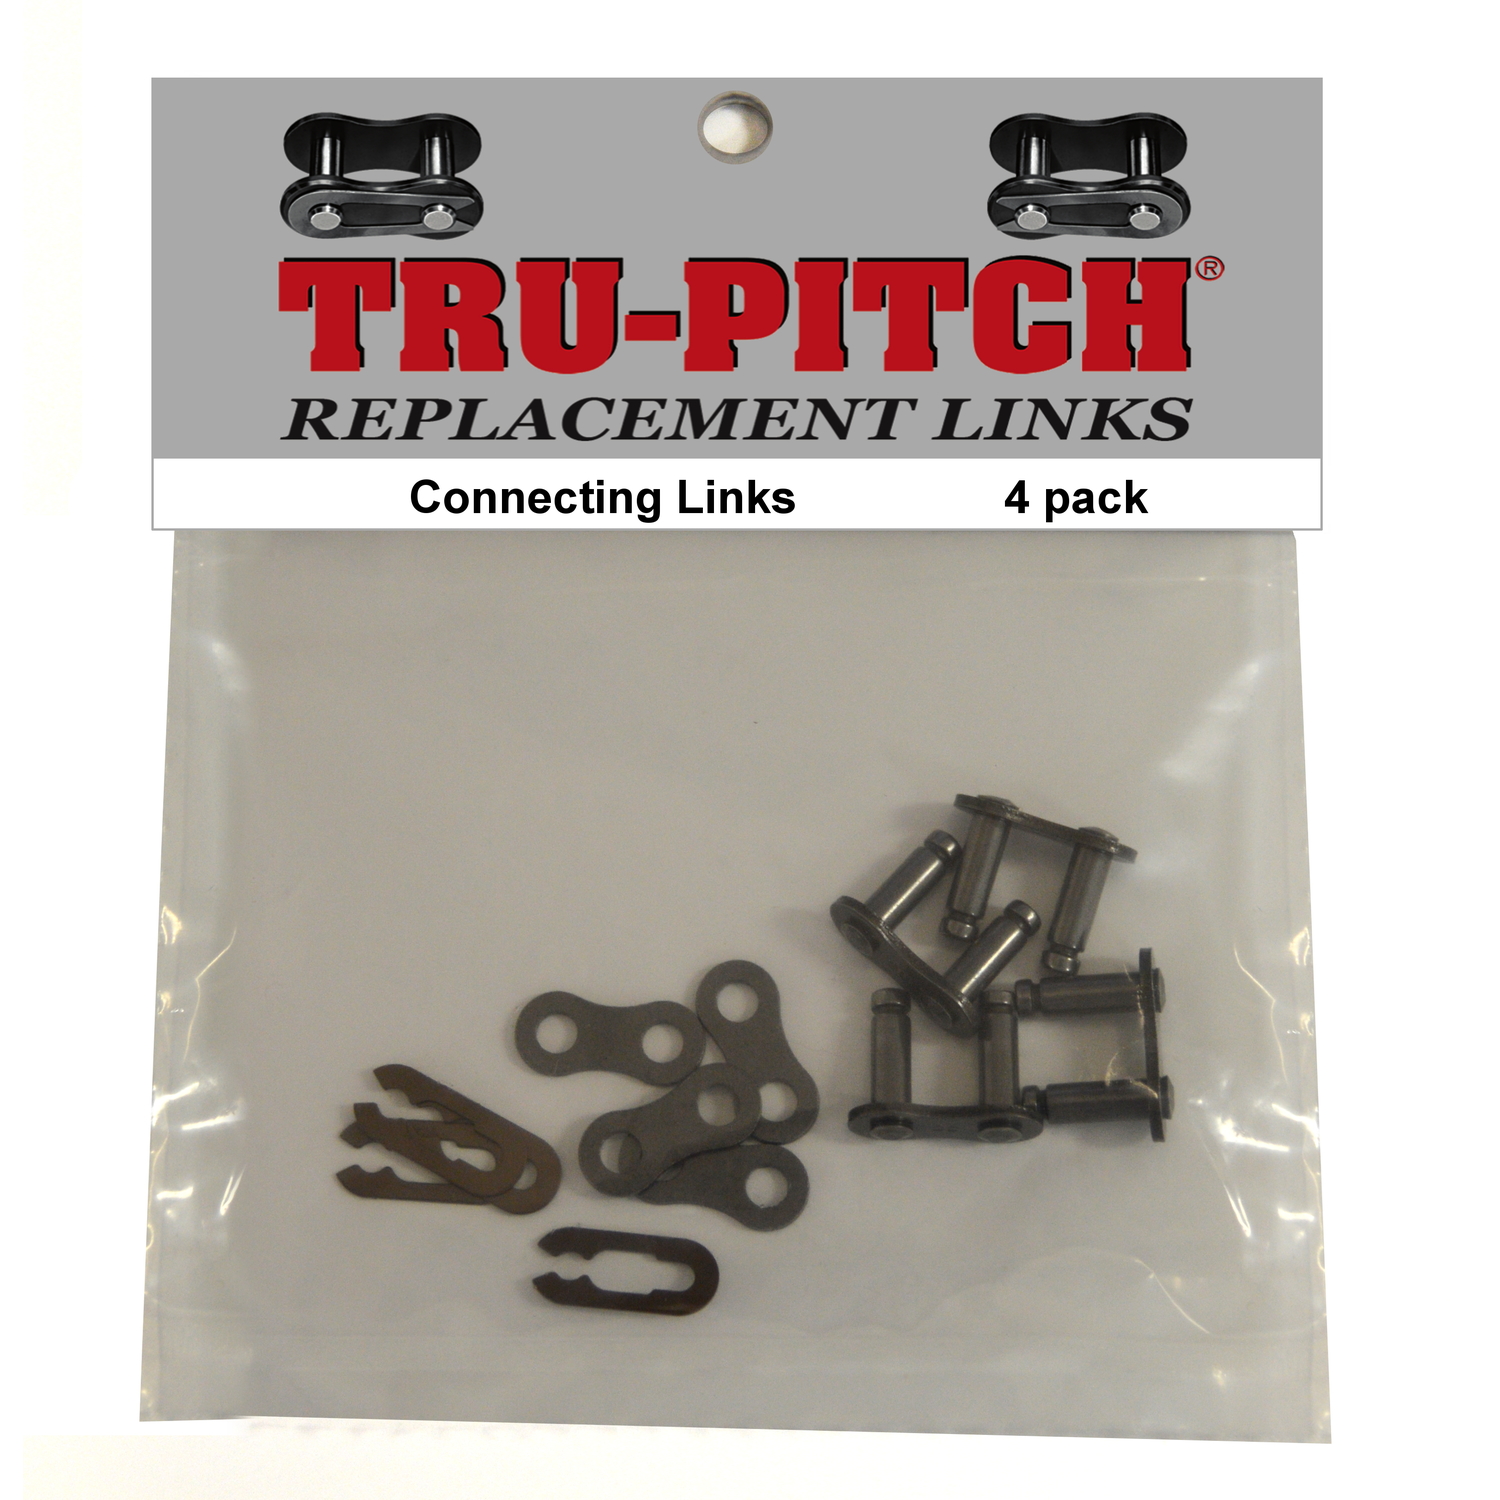 CountyLine 1/4 in. to 3/4 in. Pitch Roller Chain Breaker at